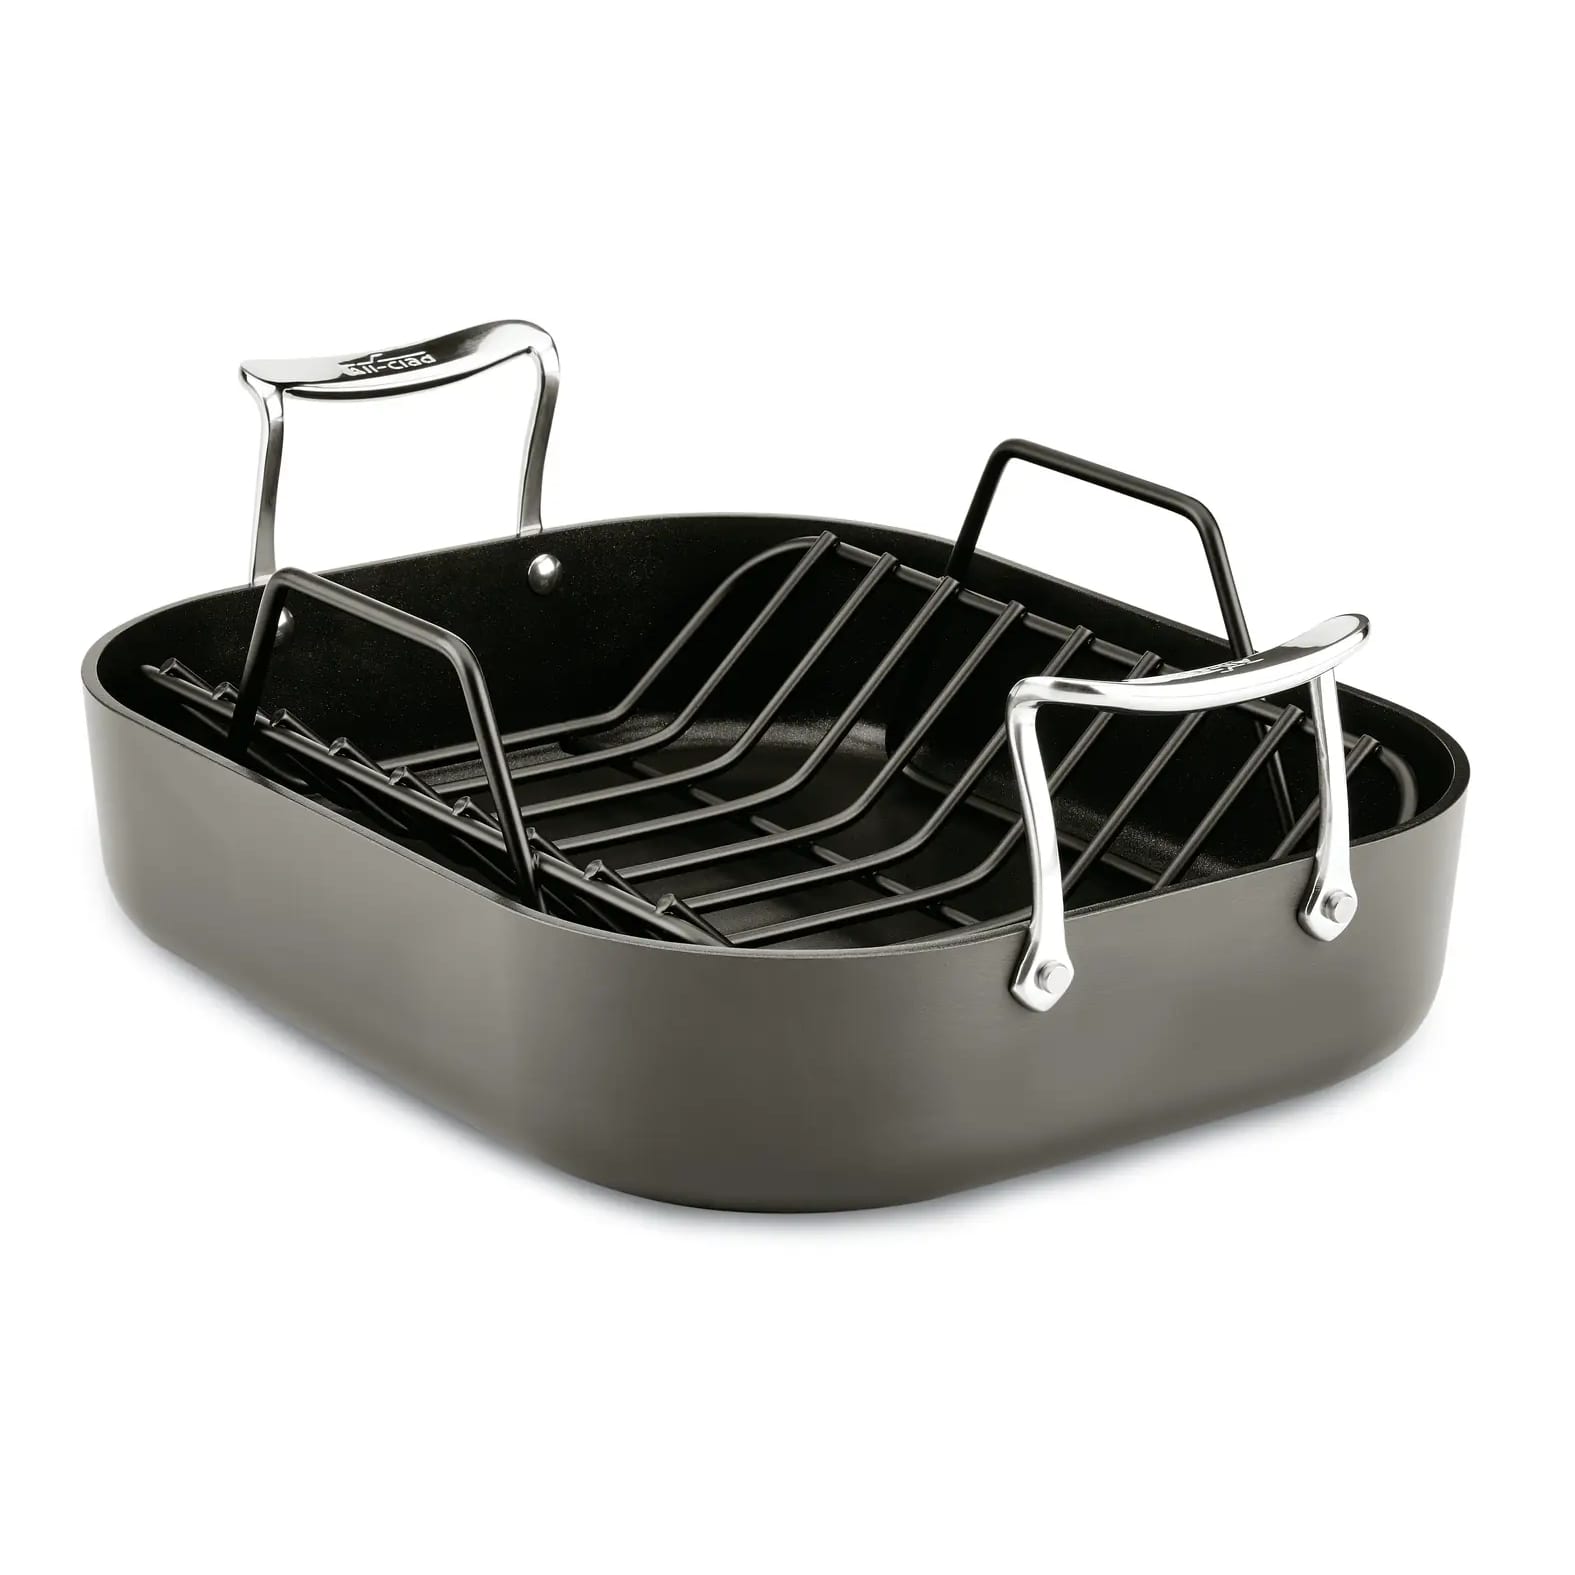 http://cdn.apartmenttherapy.info/image/upload/v1684165429/commerce/Small-Nonstick-Roaster-with-Rack-all-clad.jpg